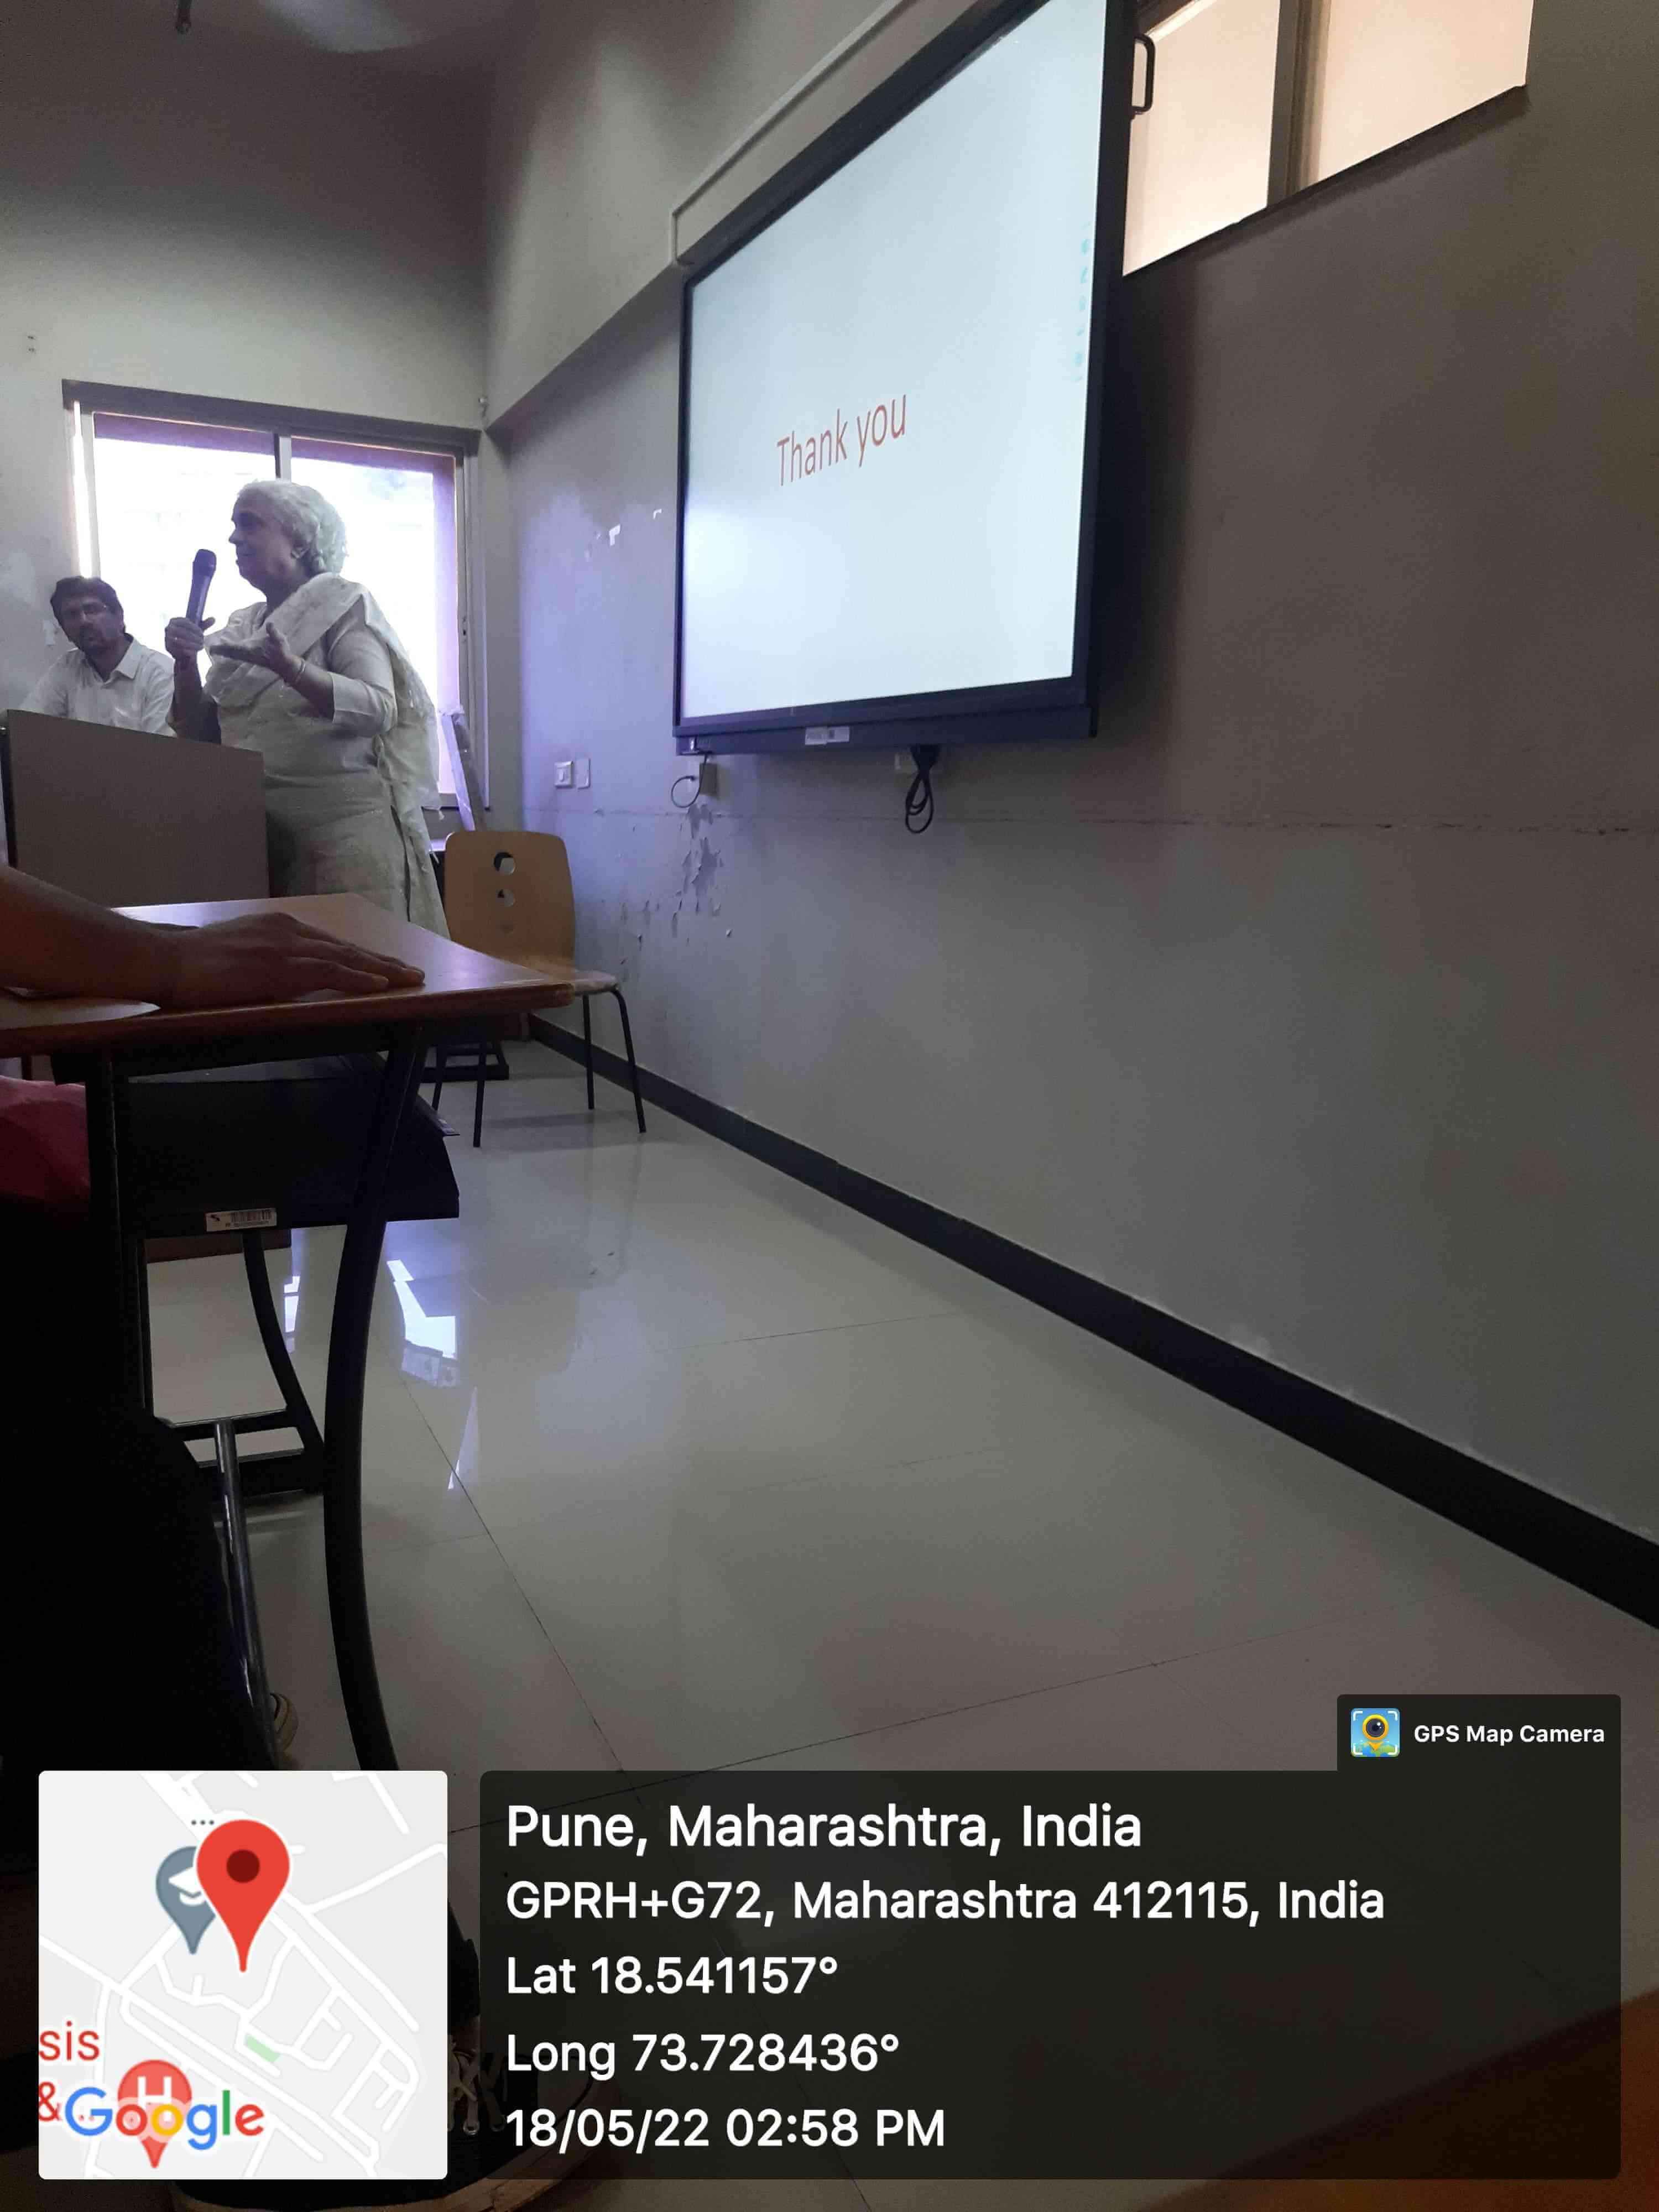 Dr. Rita Mulherkar – Managing Director of Samarthakrupa Life Sciences Pvt. Ltd., India 18th May 2022. Lecture title: Cell therapy for back pain